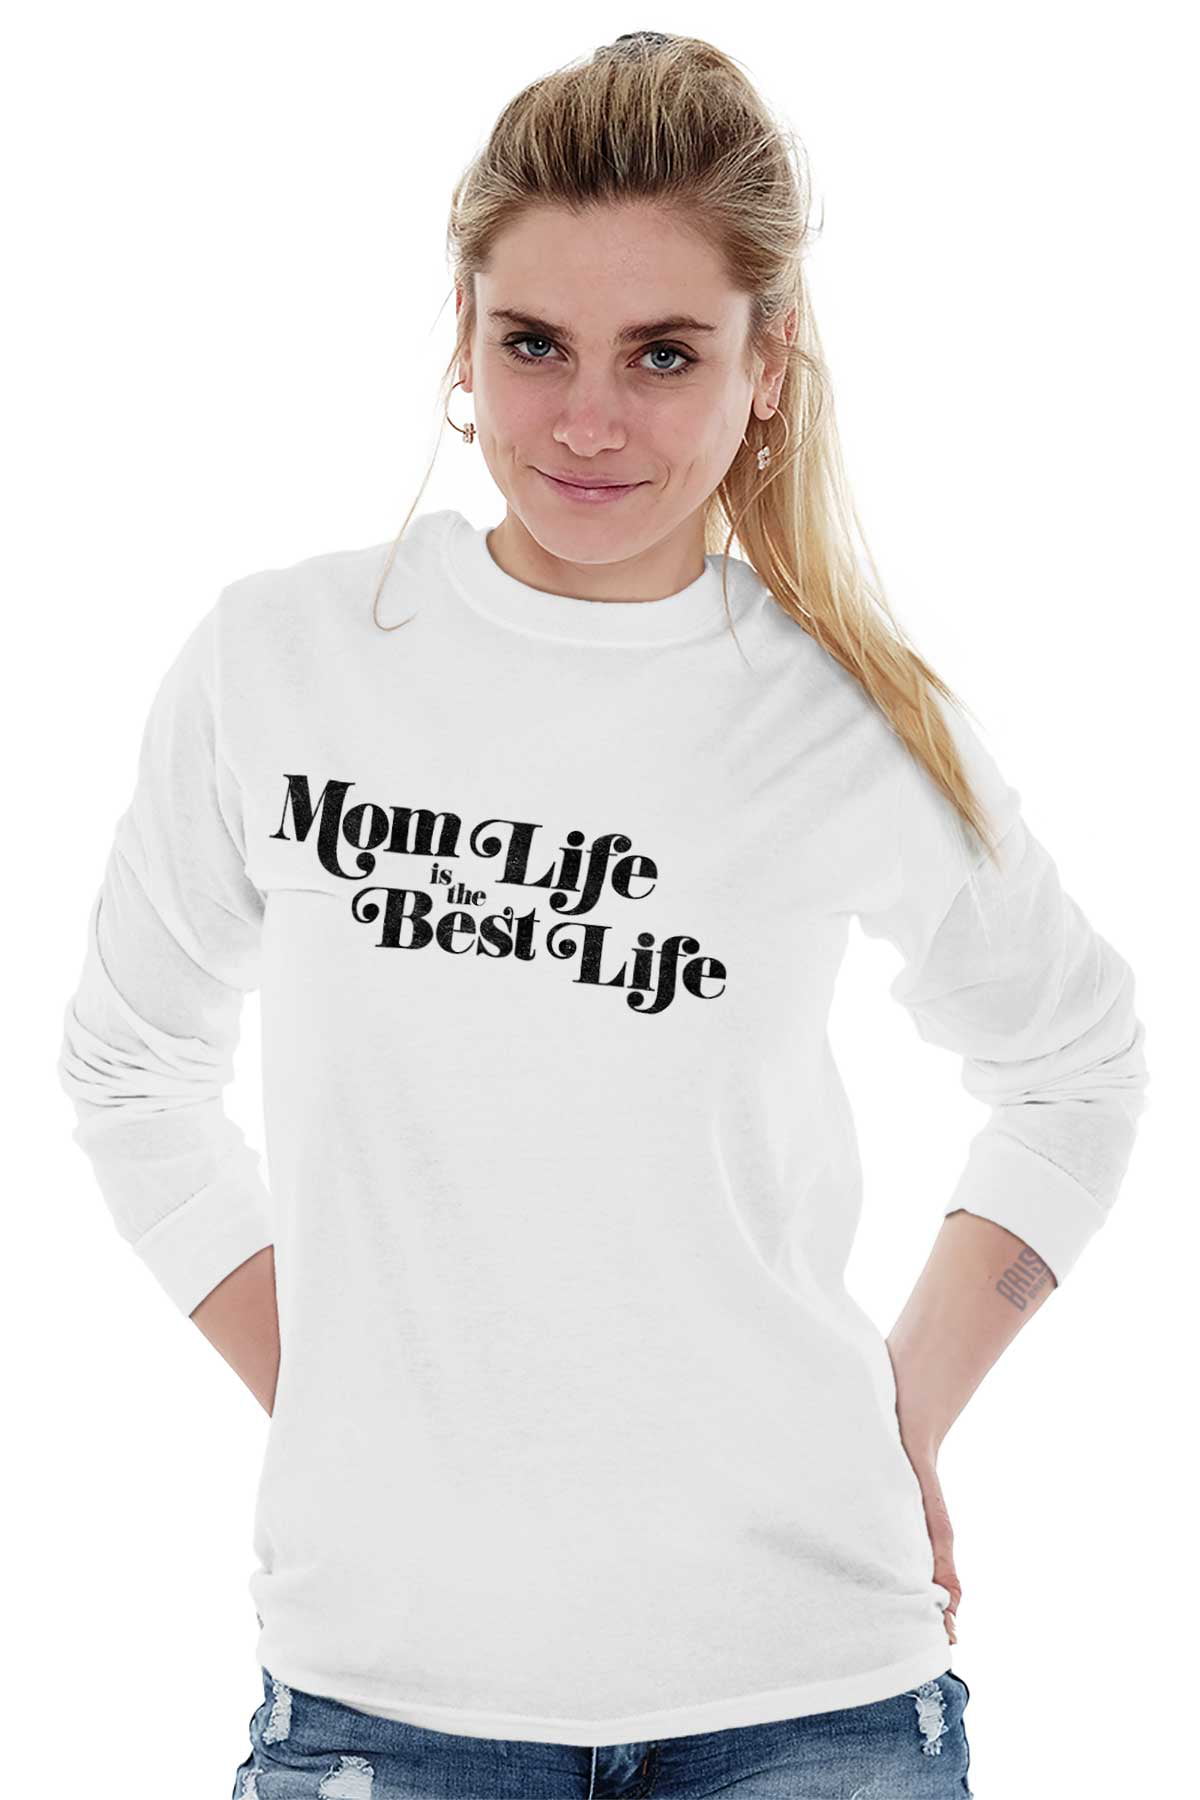 Mother's Day Shirt Girl Mama Shirt Mom of Girls Shirts Mom Shirt Mom Life Shirts Life is Better with My Girls Shirt Mommy Shirt